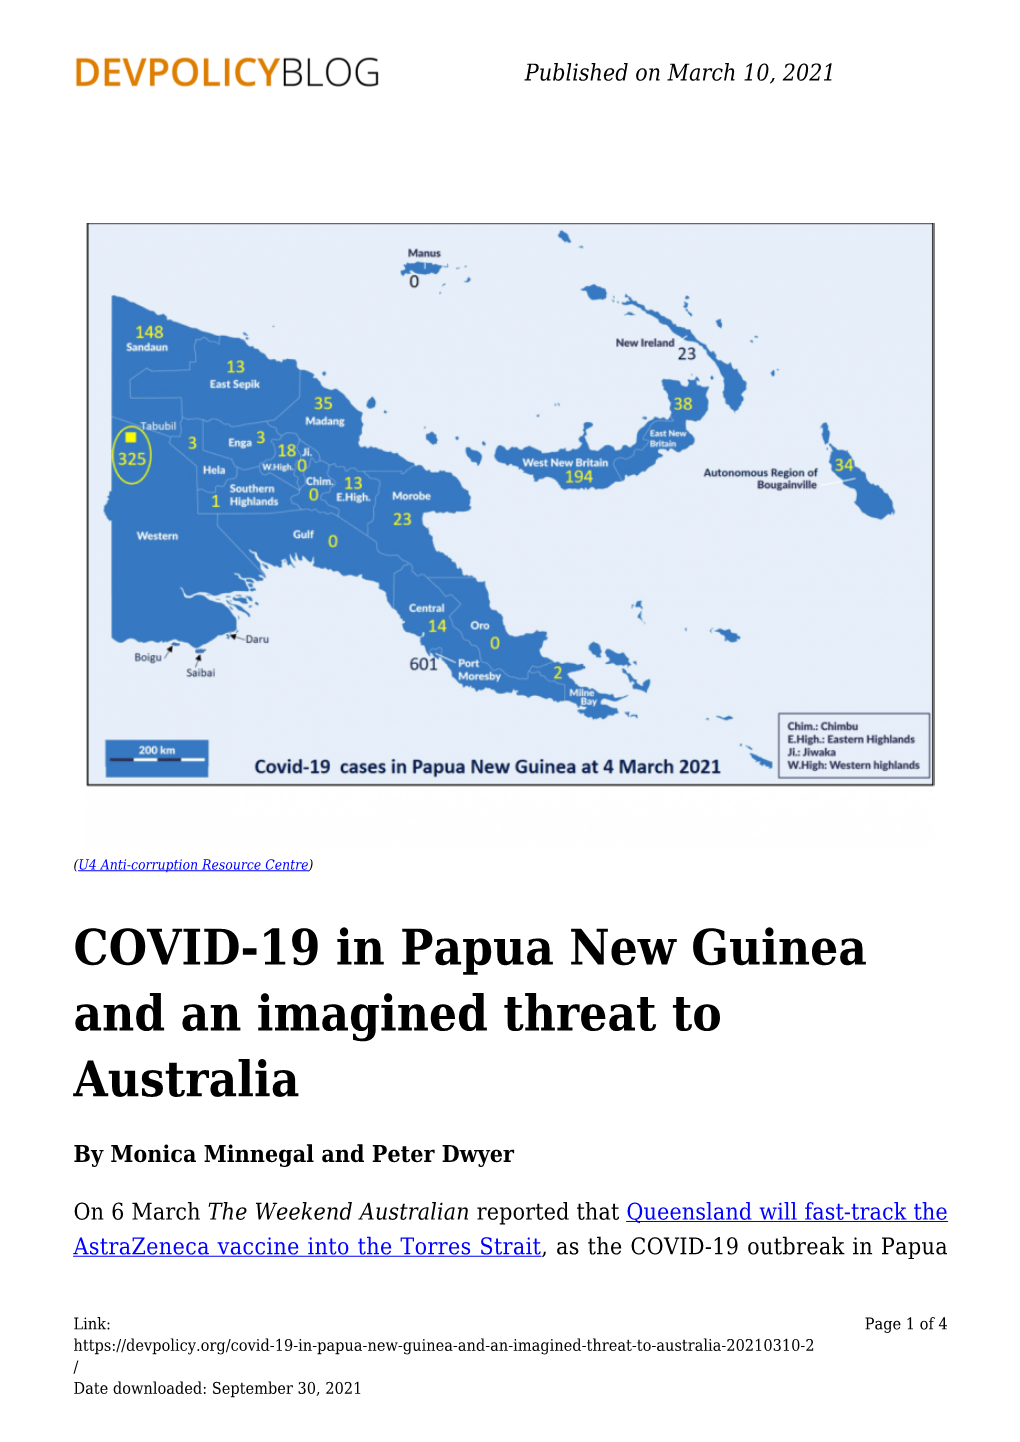 COVID-19 in Papua New Guinea and an Imagined Threat to Australia